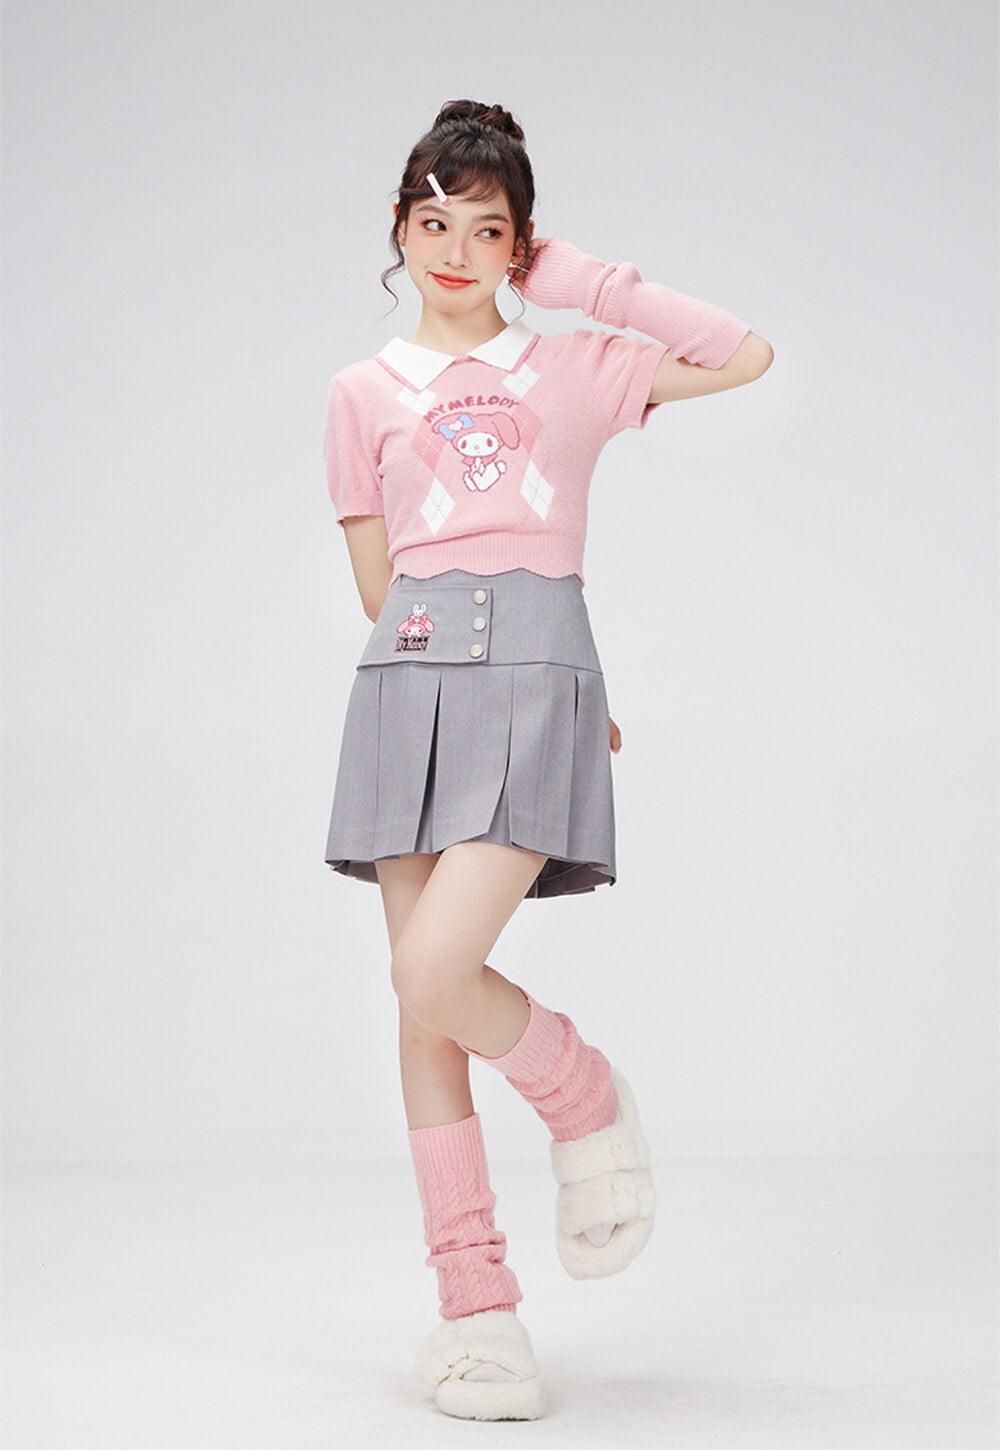 Japanese-style-girly-jk-outfit-pink-my-melody